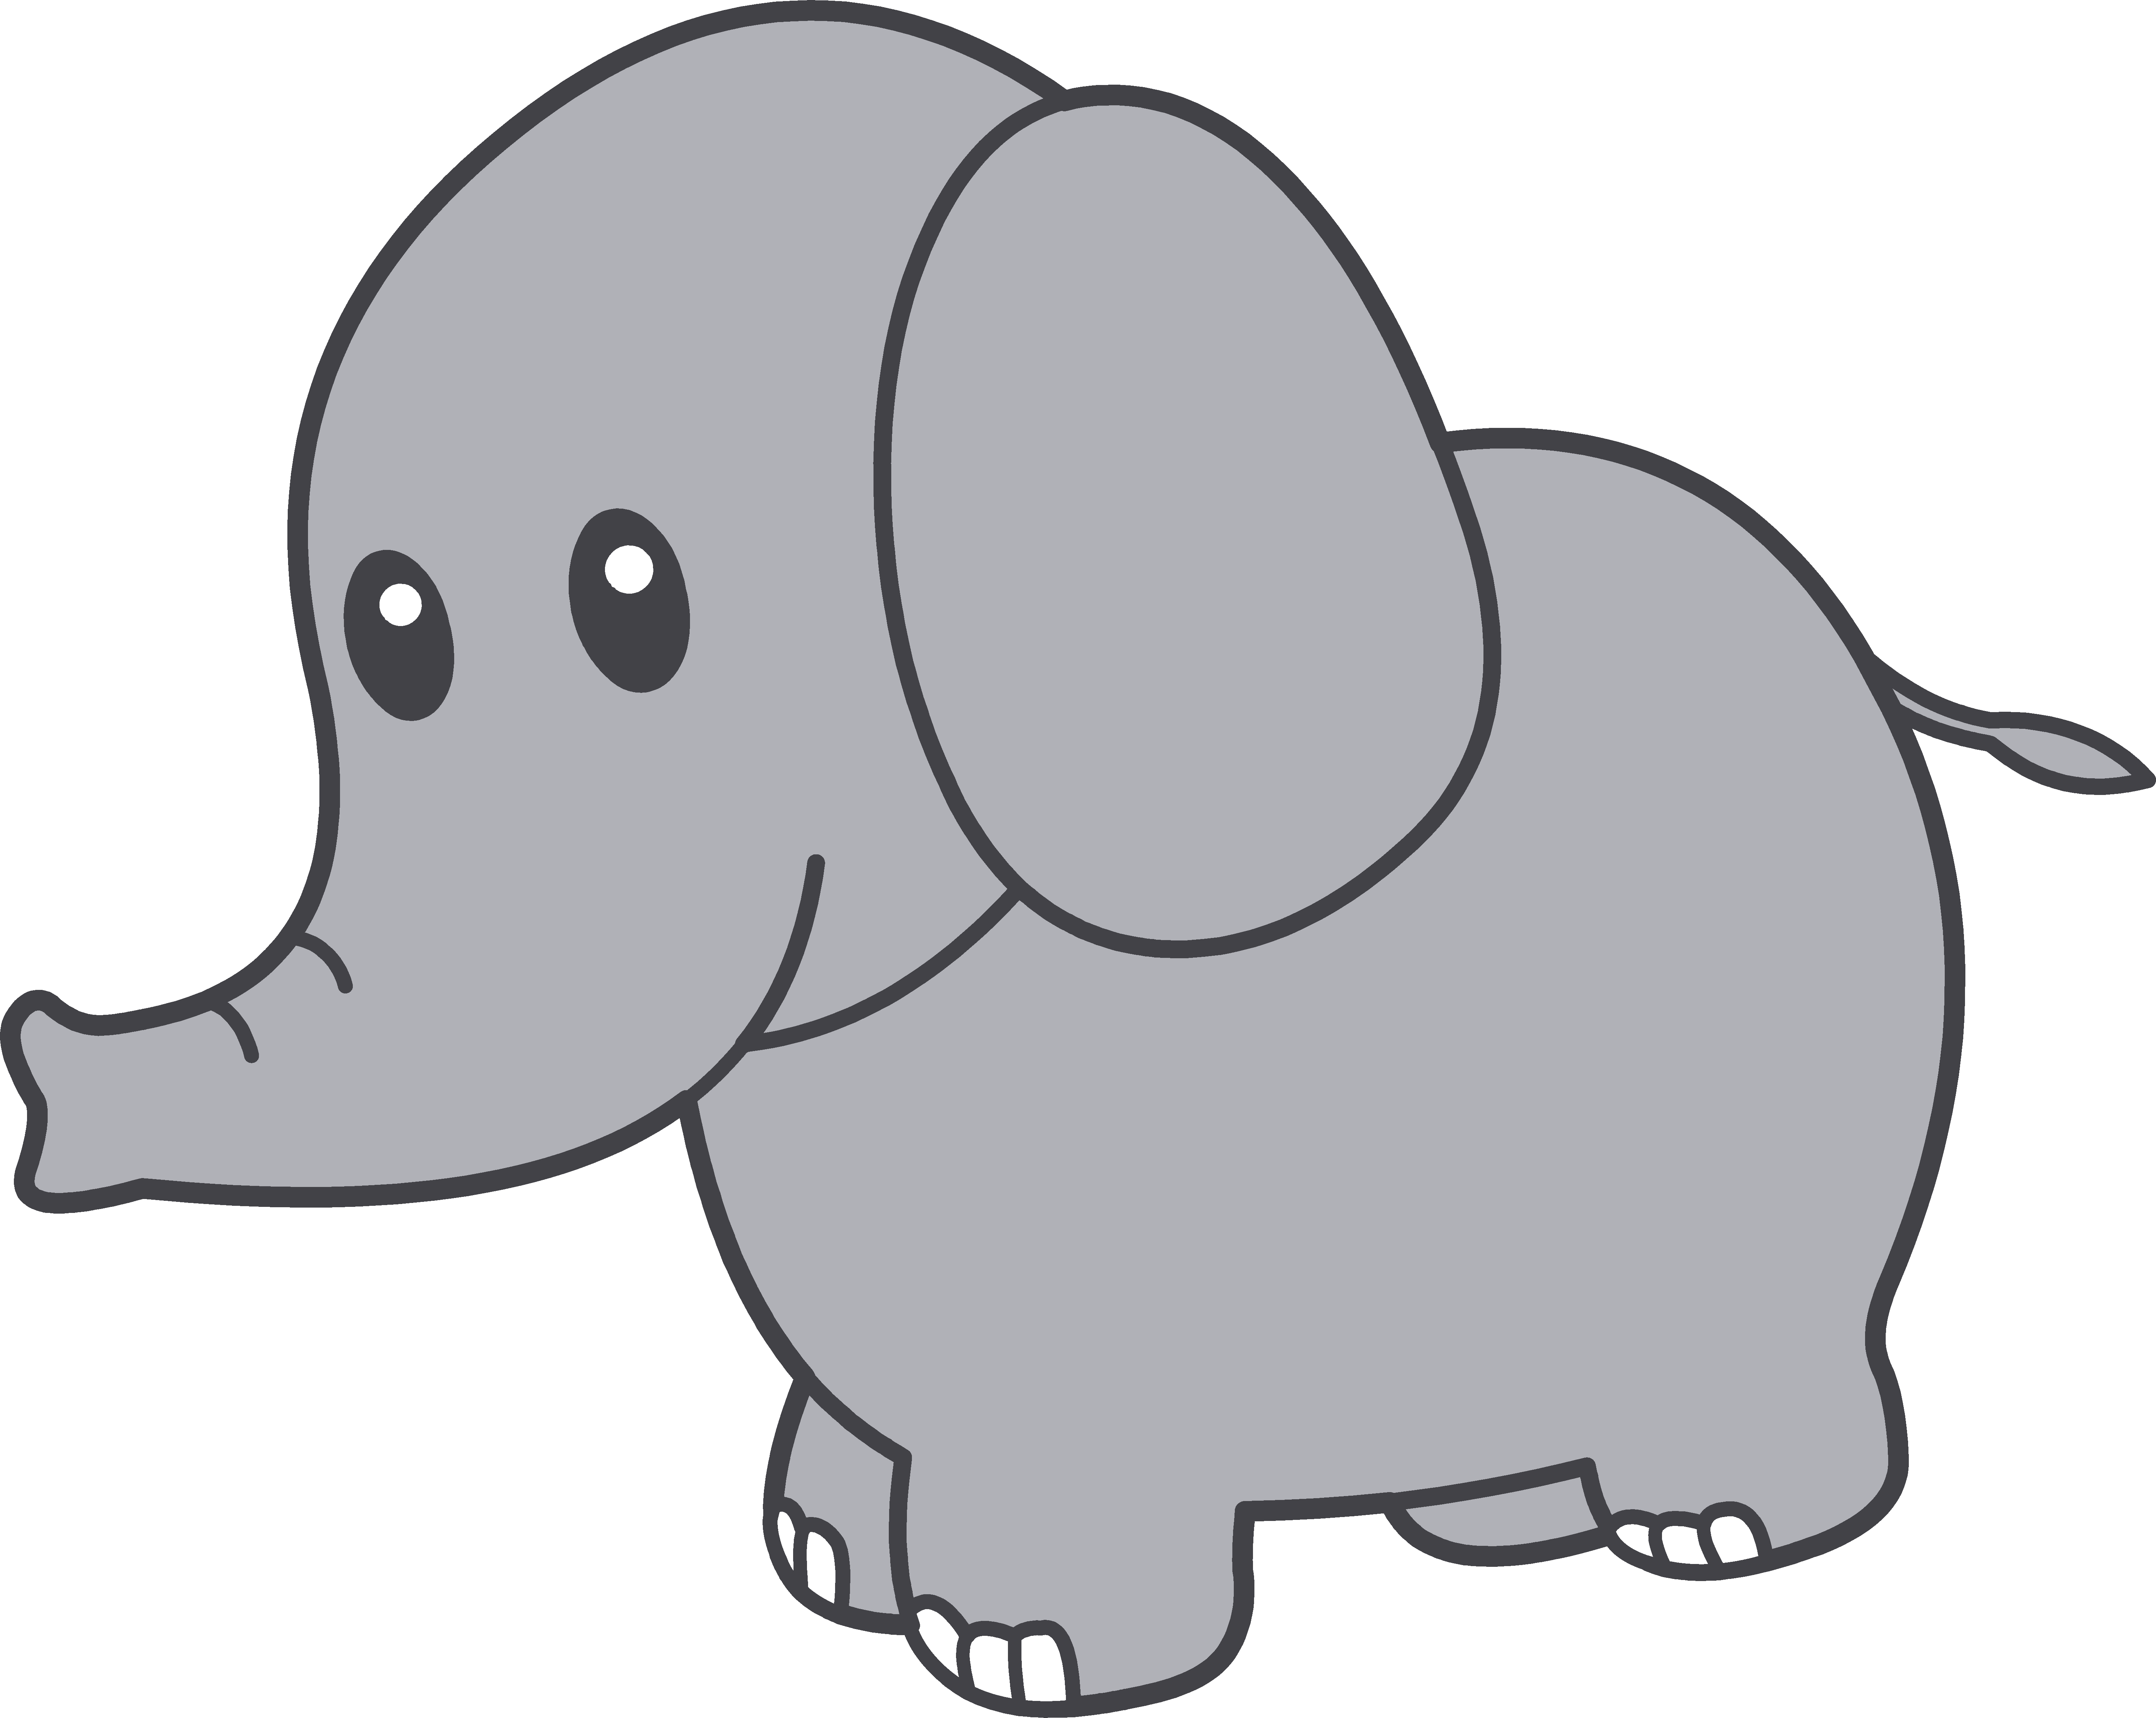 Elephant clipart image cute cartoon baby elephant with trunk in ...